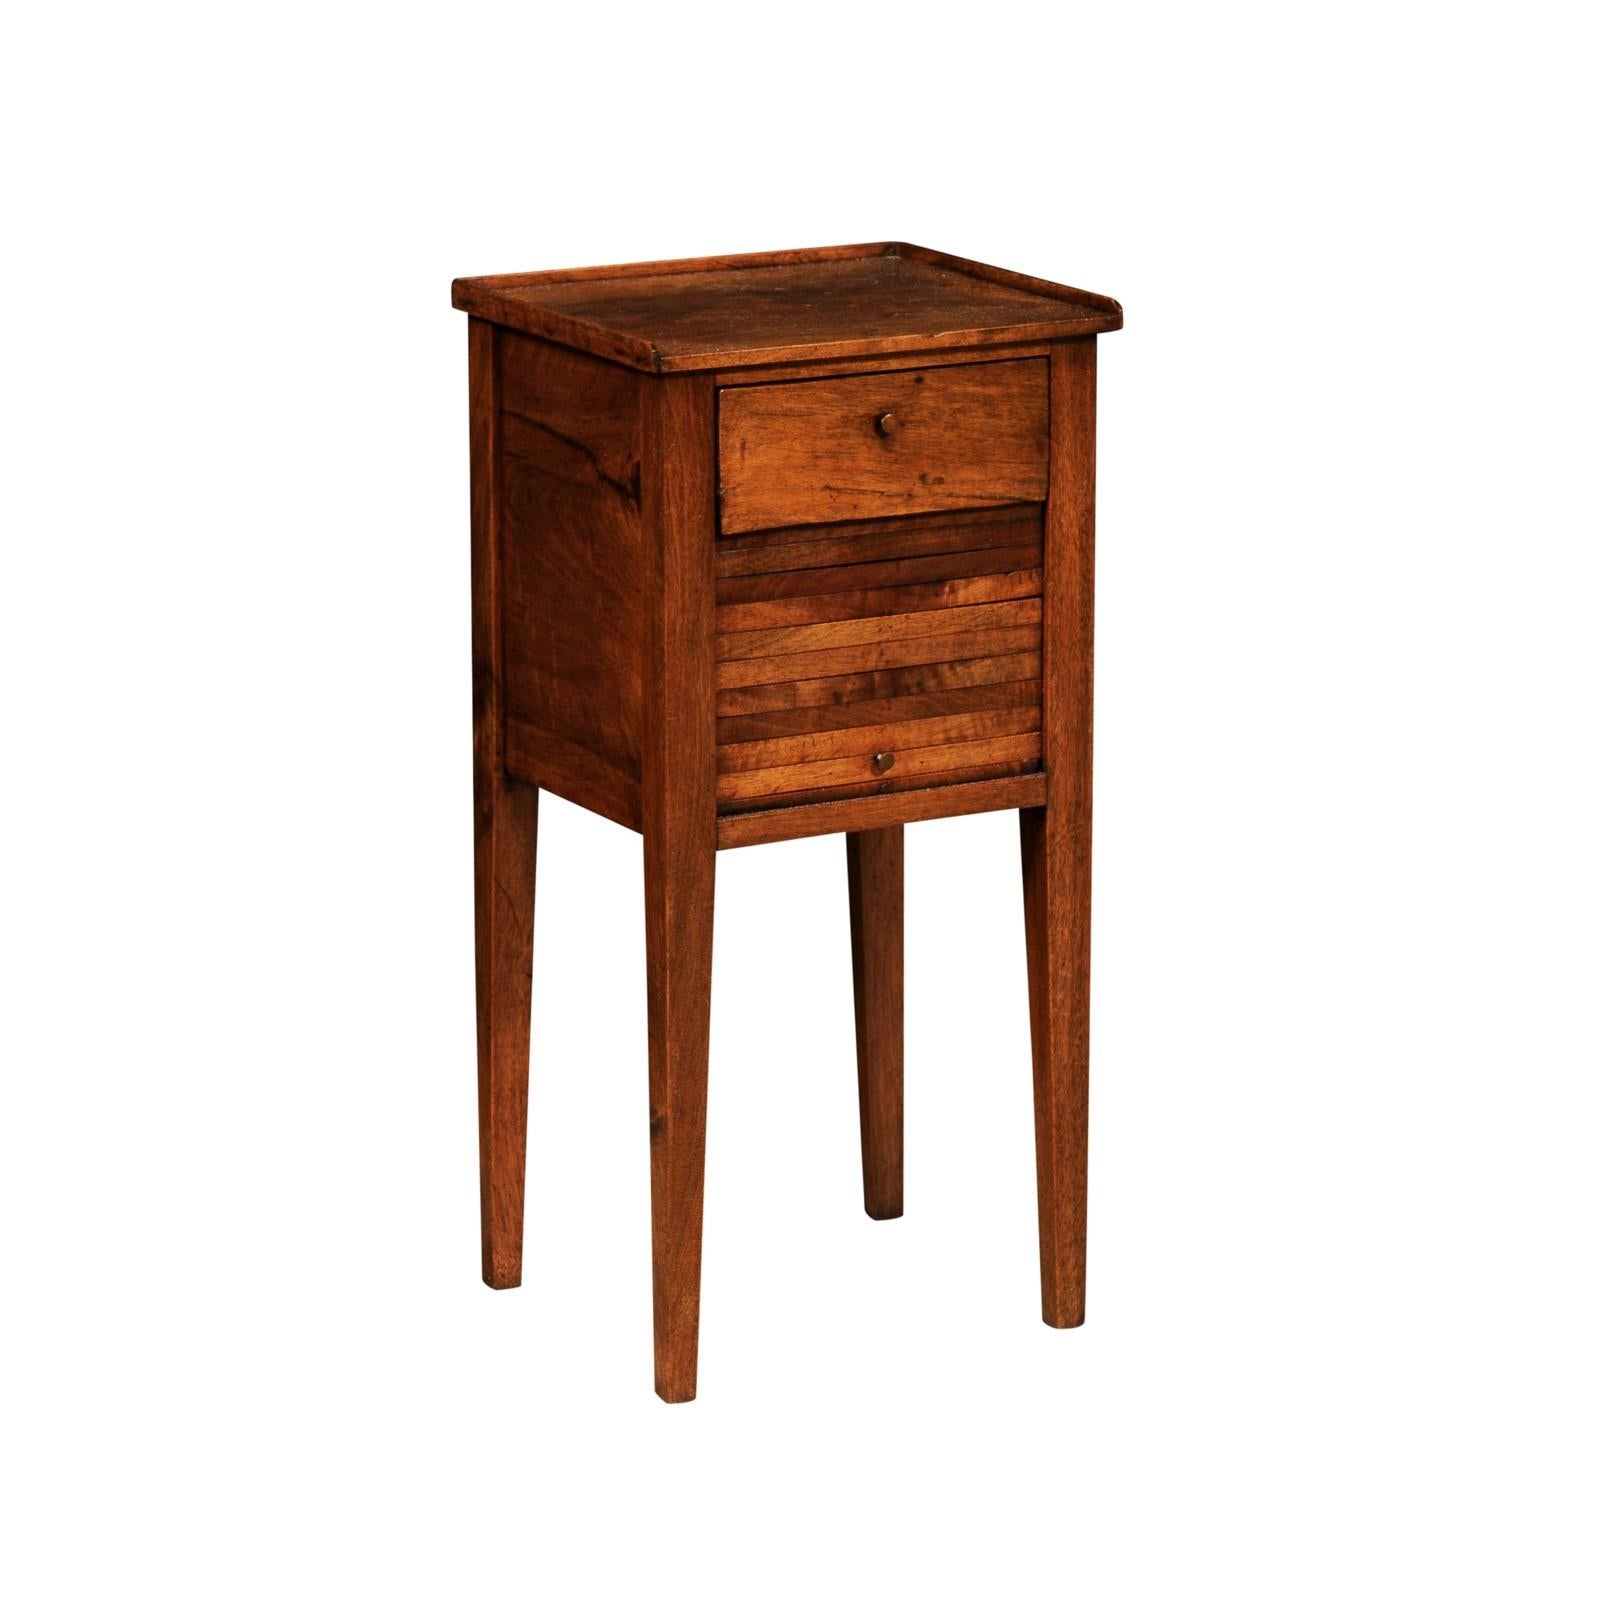 An Italian walnut bedside table from the 18th century with single drawer at the top, tambour door below and four tapered legs. Discover the rustic charm and functional elegance of this 18th-century Italian walnut bedside table, a piece that